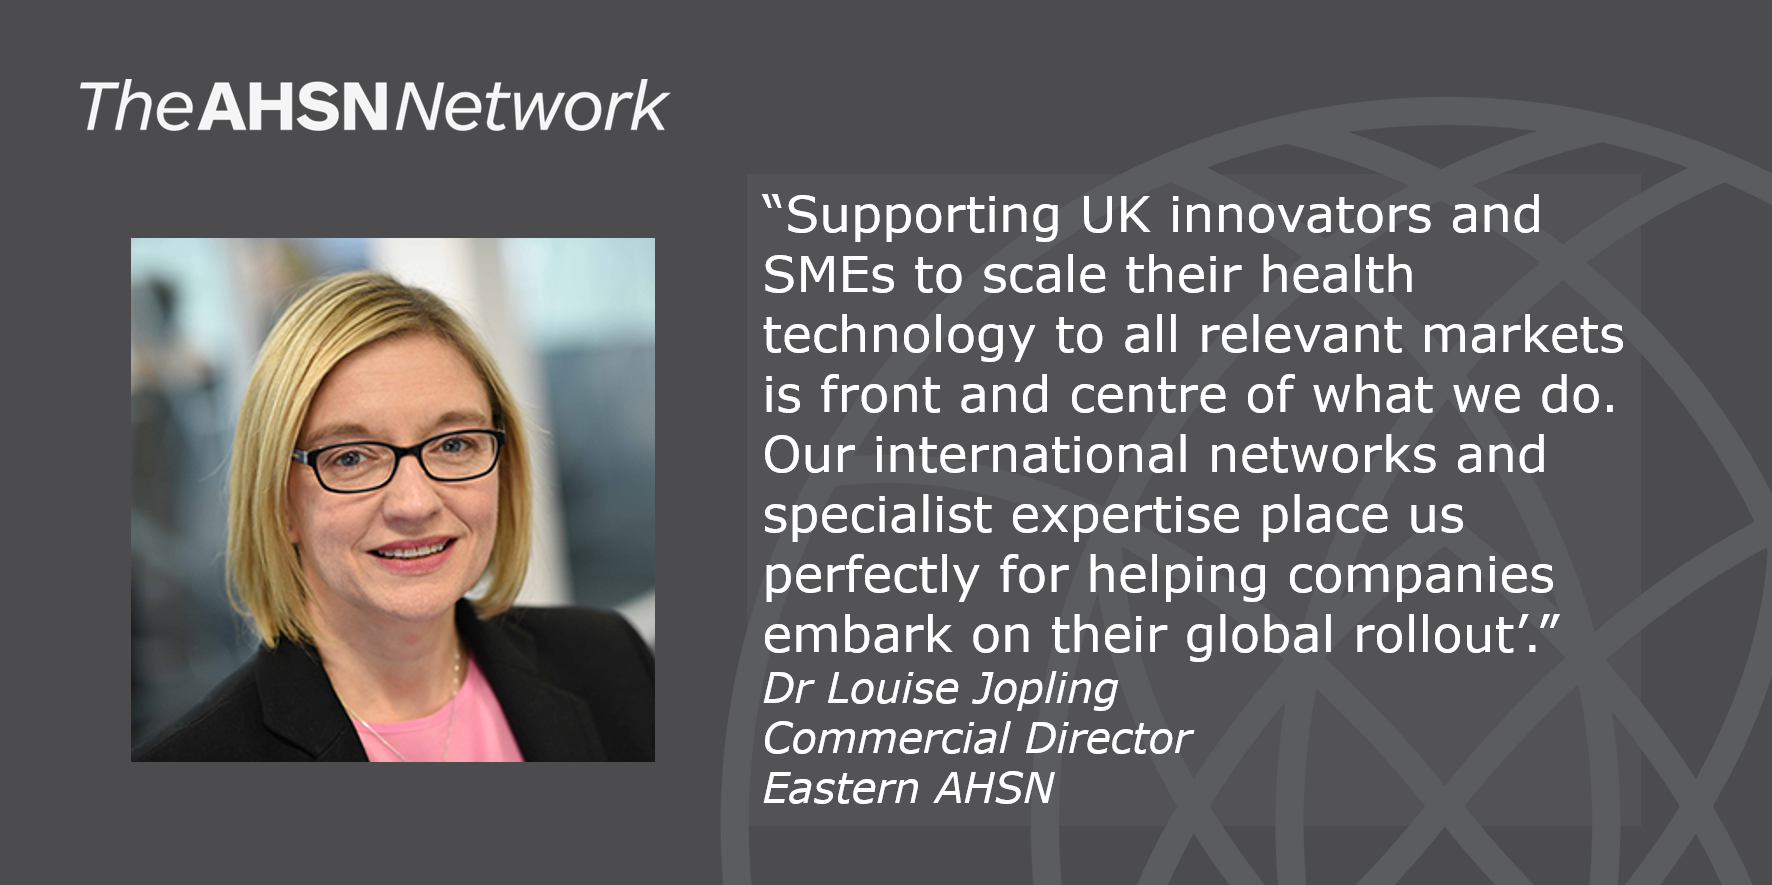 "Supporting UK innovators and SMEs to scale their health technology to all relevant markets is front and centre of what we do. Our international networks and specialist expertise place us perfectly for helping companies embark on their global rollout." Dr Louise Jopling, Commercial Director, Eastern AHSN